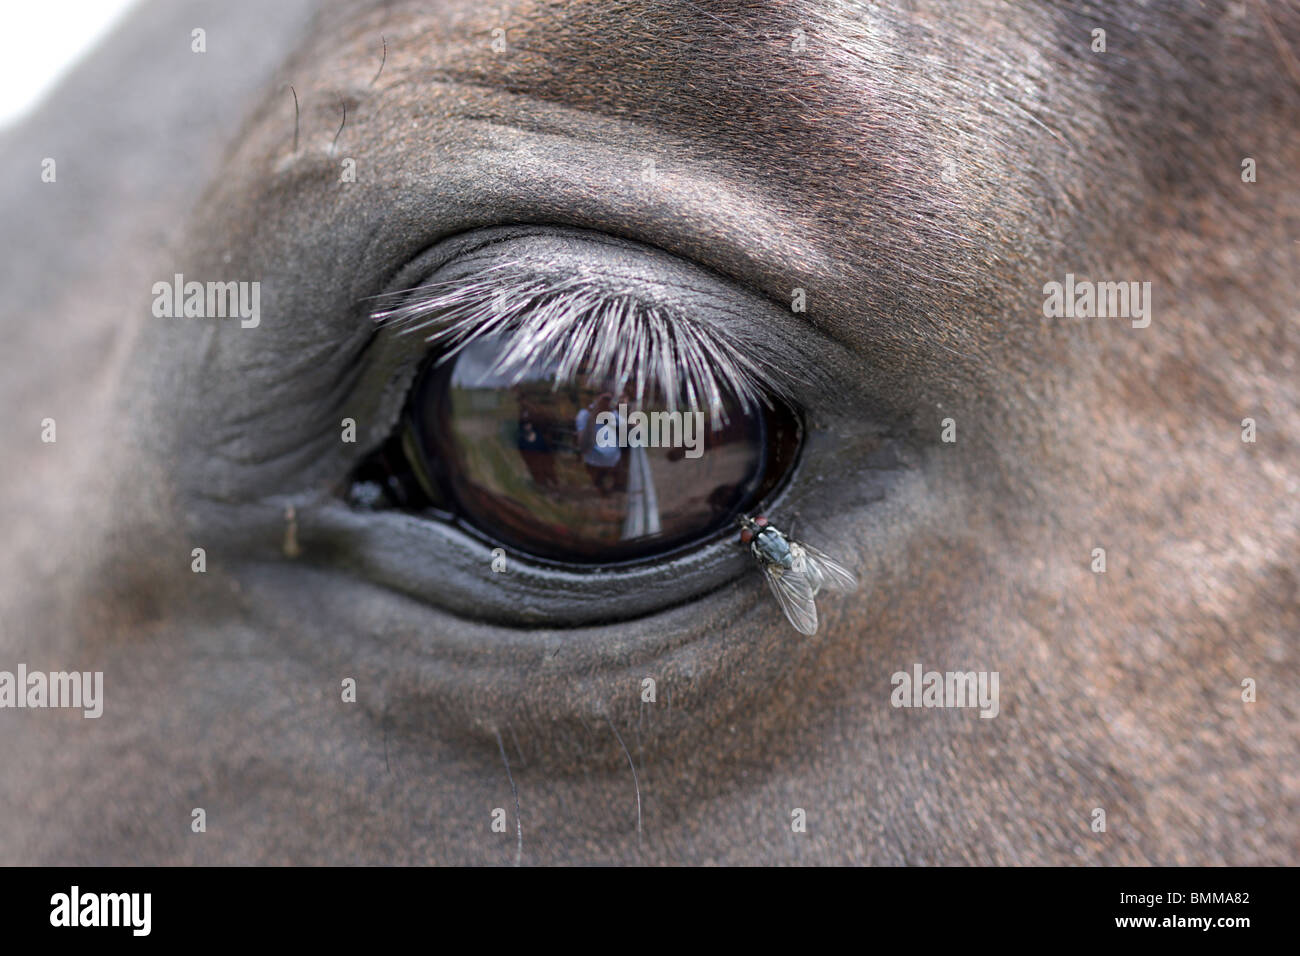 Close up red eyed volare a cavallo eye Foto Stock